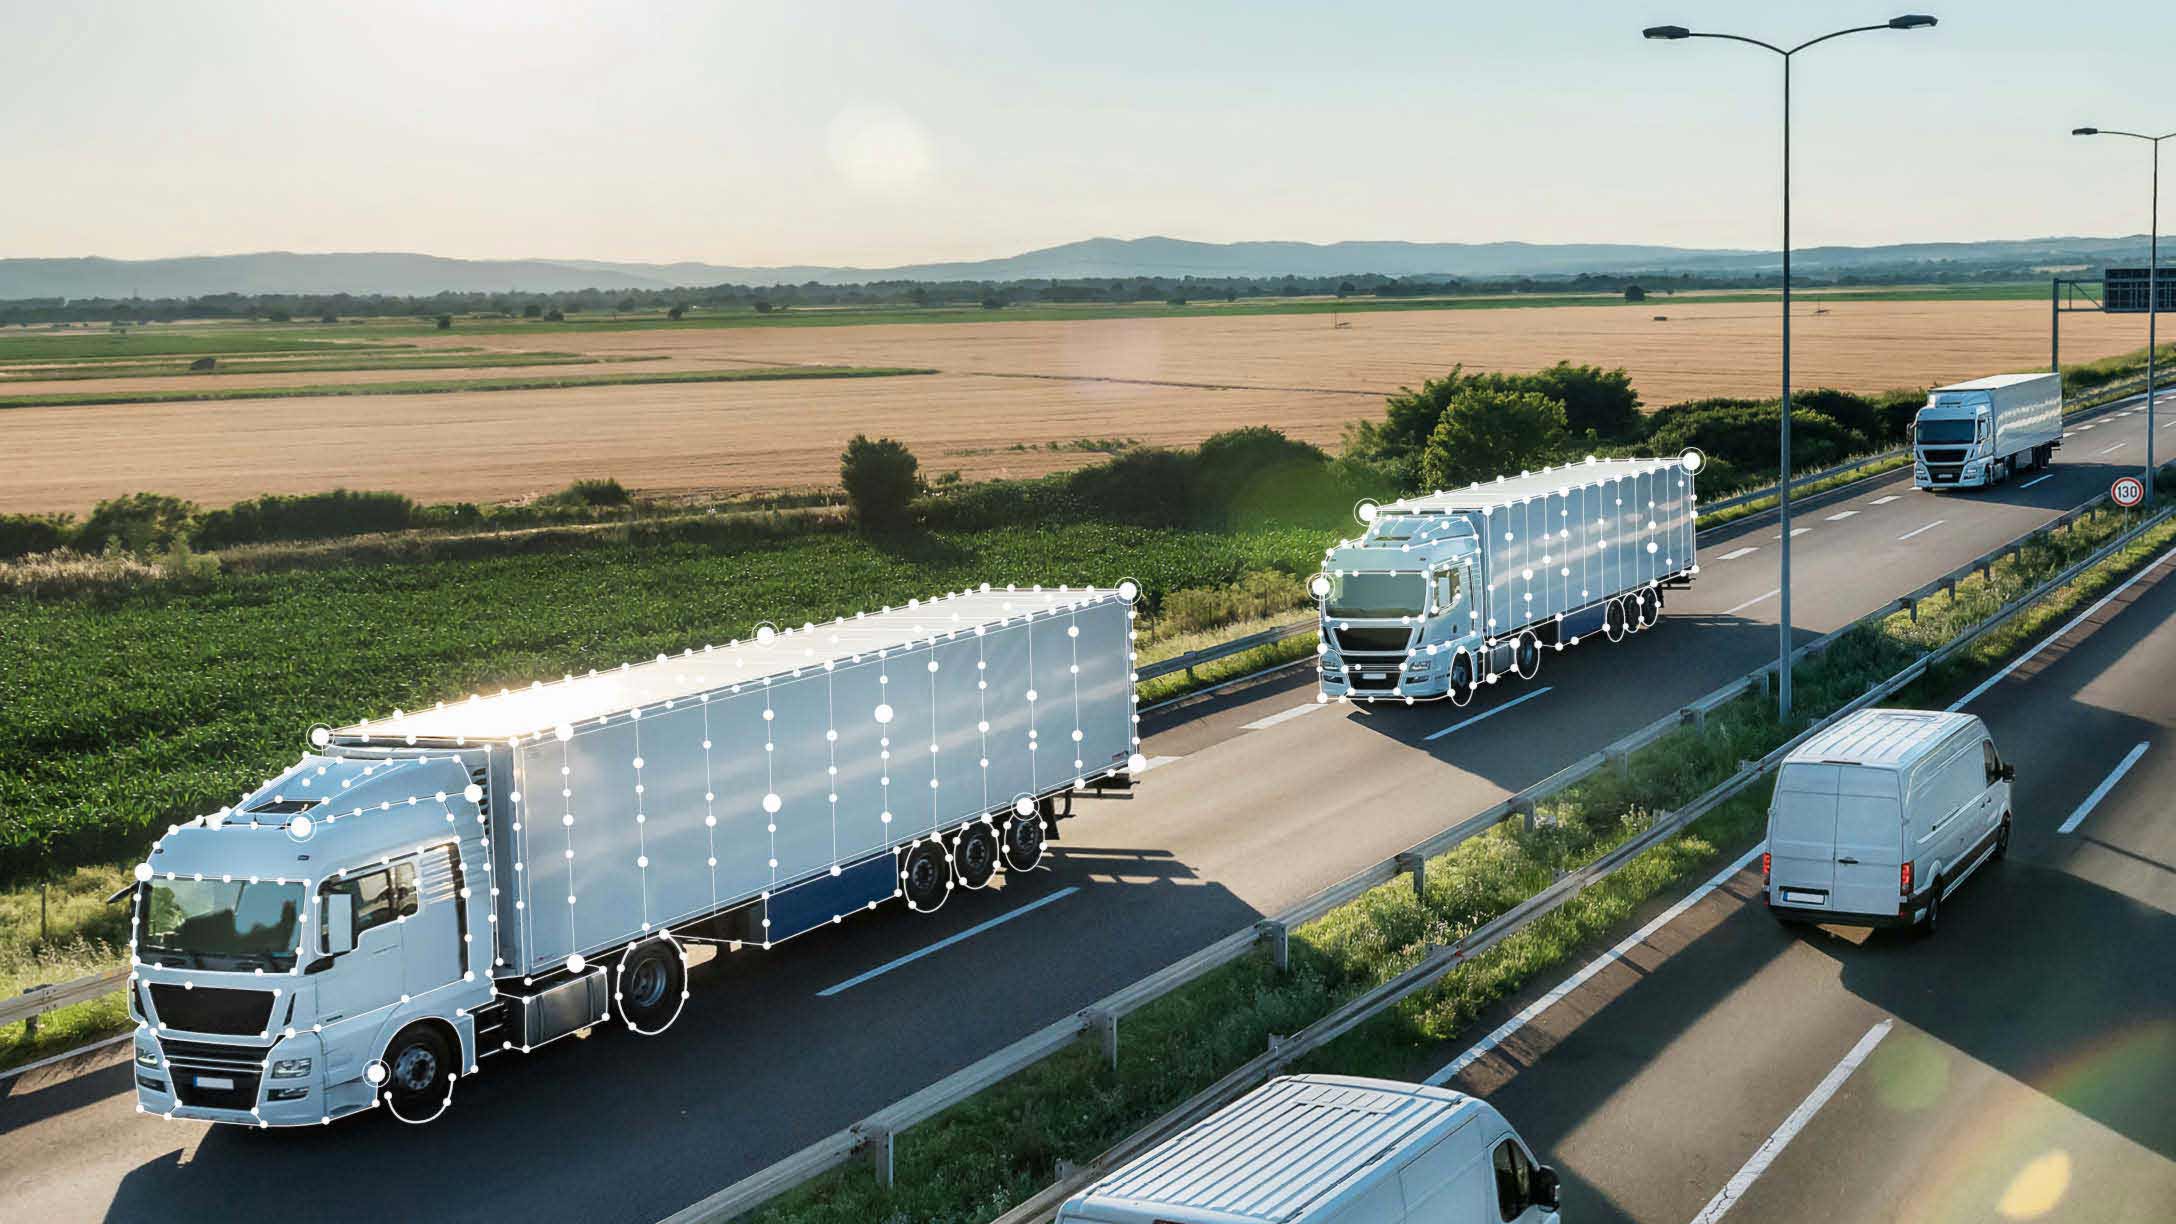 Semi trucks and vans with data points driving on a two-way highway with fields in background